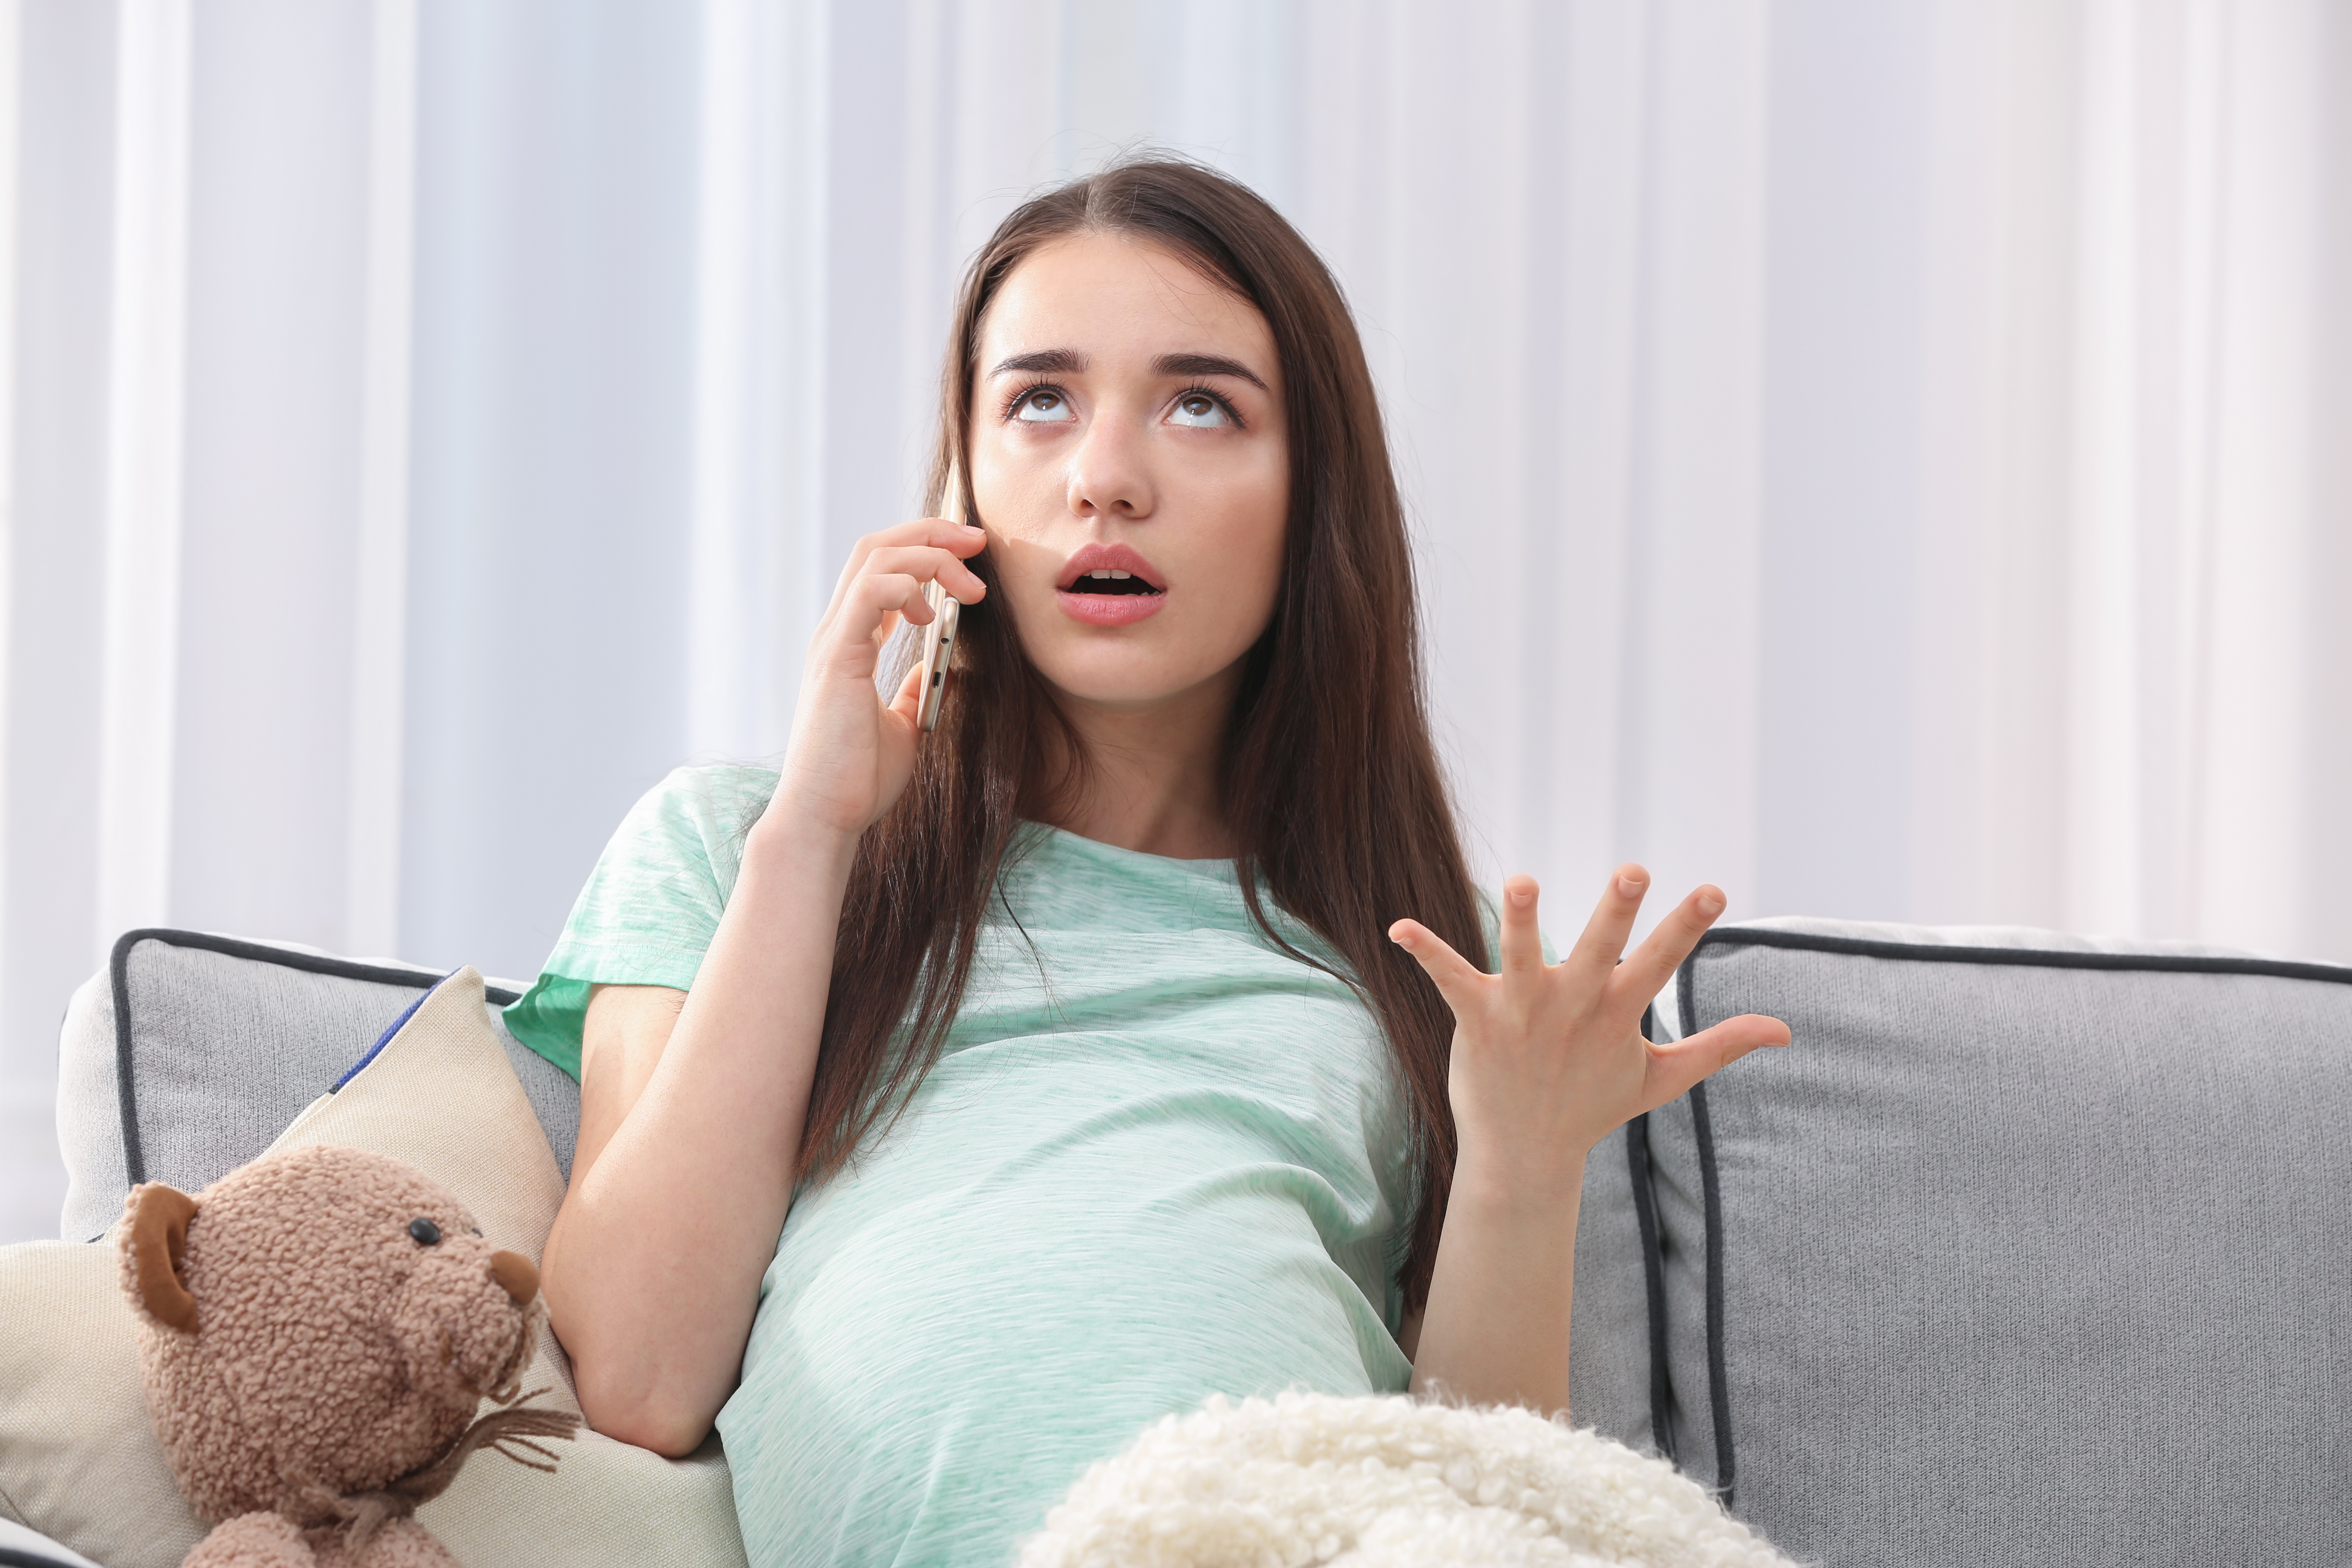 A pregnant woman talking on her phone | Source: Shutterstock